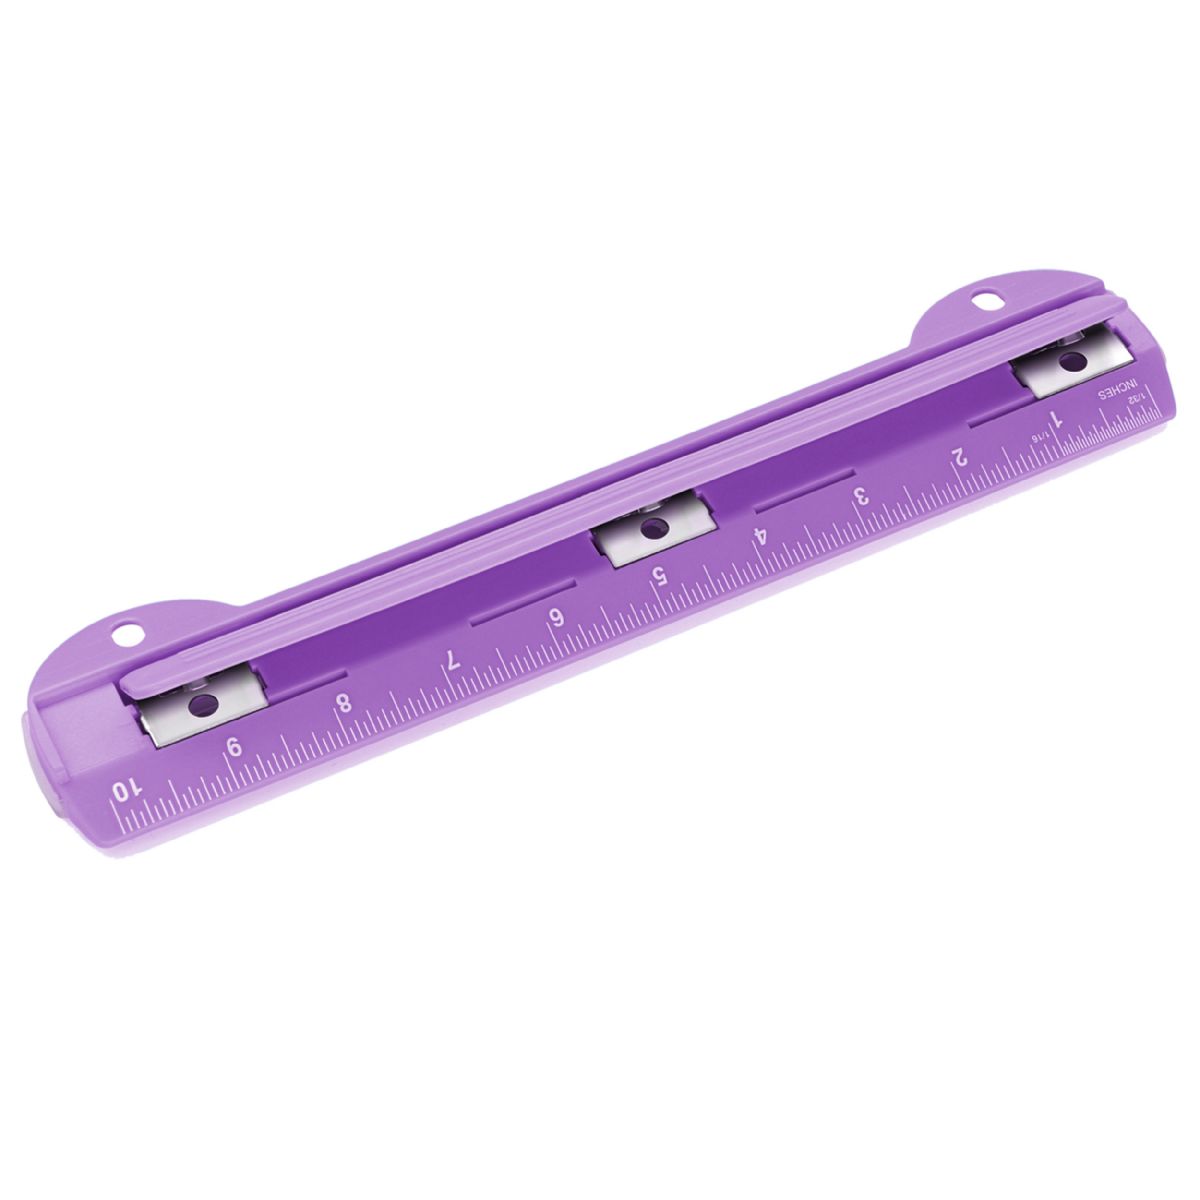 12 Pieces of Portable 3-Hole Paper Punch, Purple